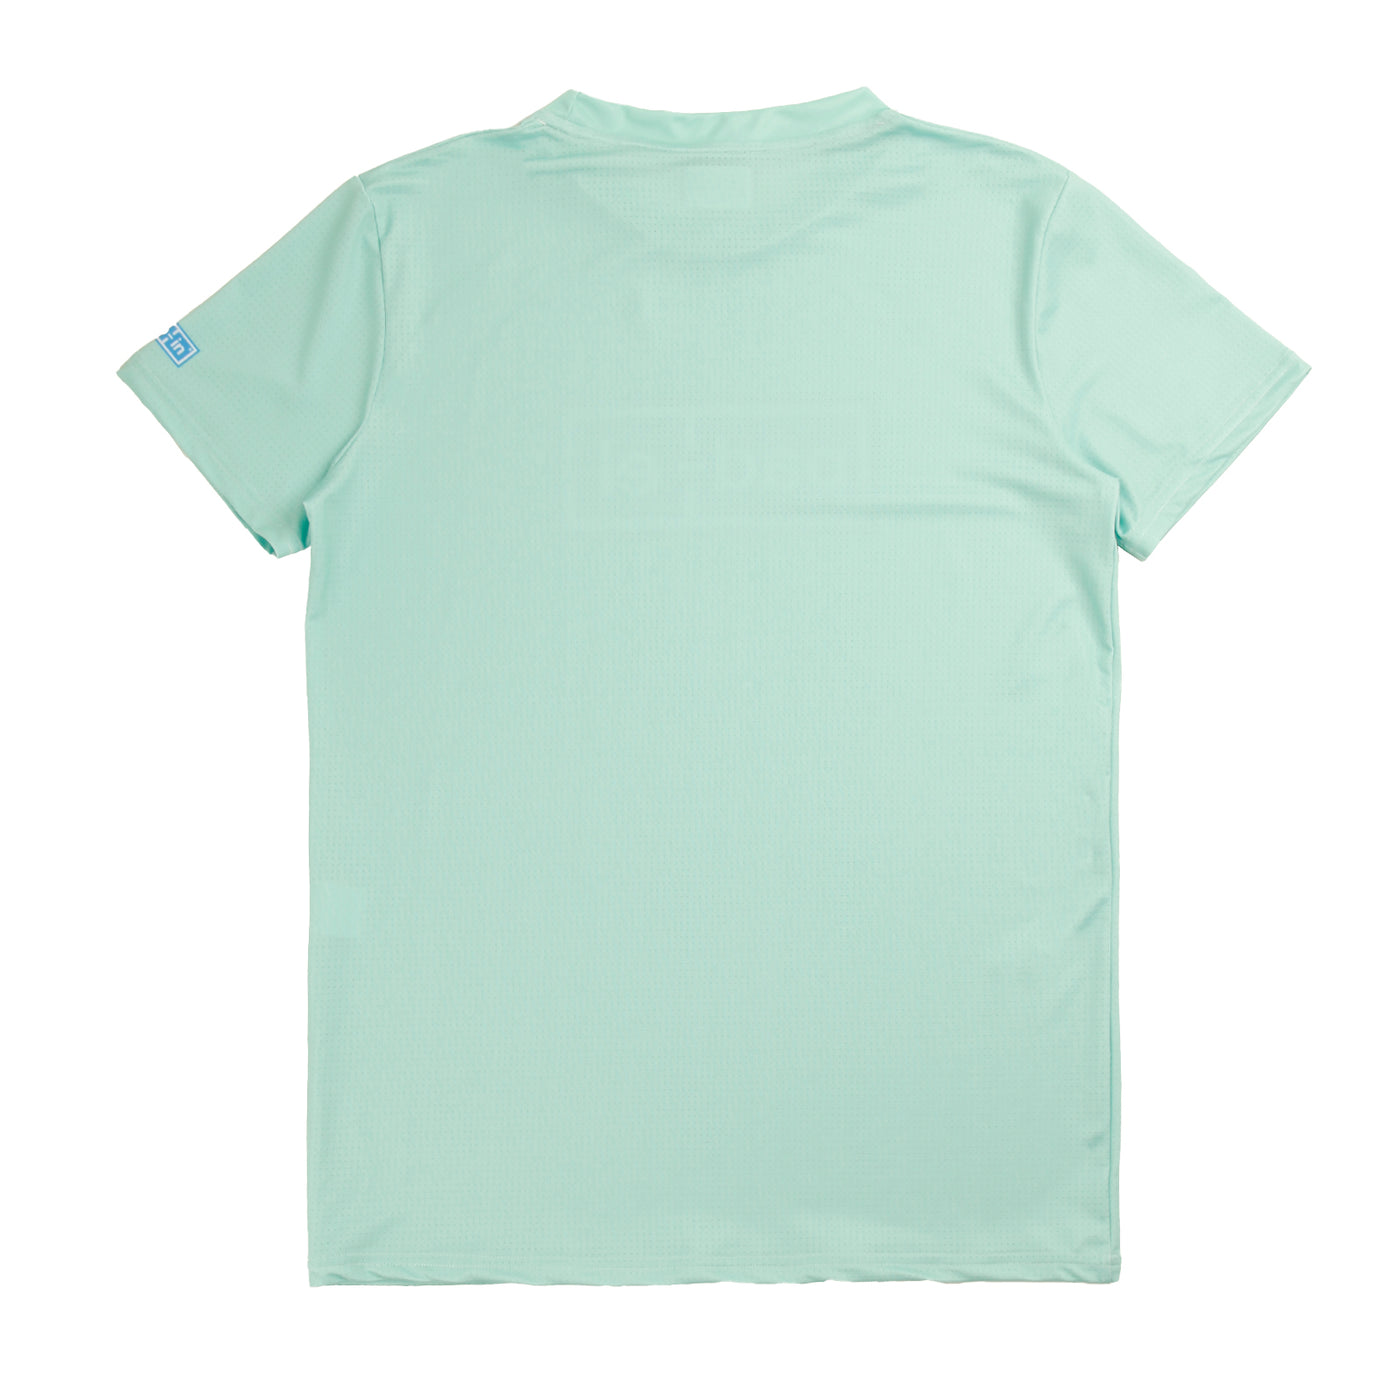 TAP-IN T-SHIRT STYLE GREEN UOMO